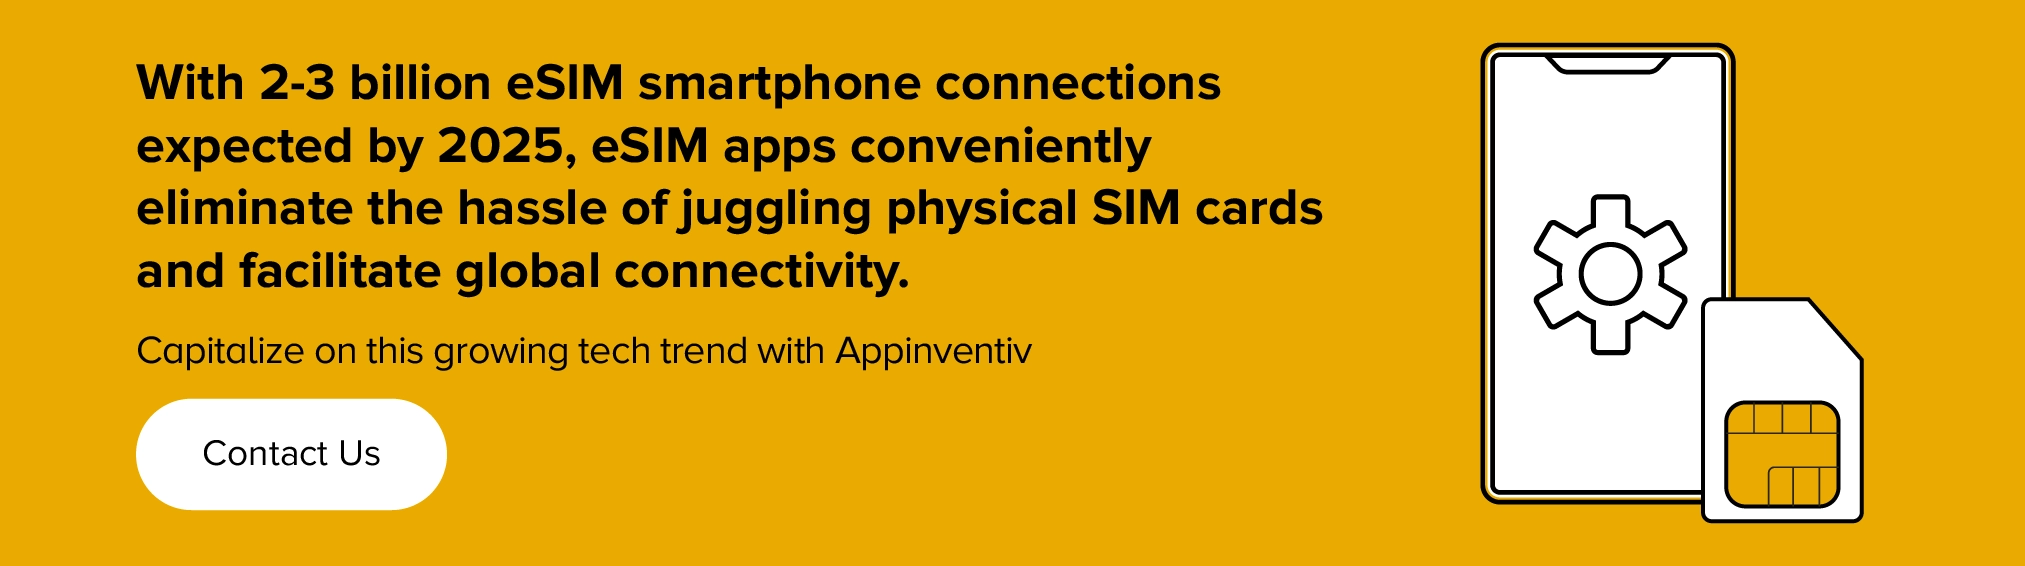 collaborate with us to capitalize on the growing eSIM app development market